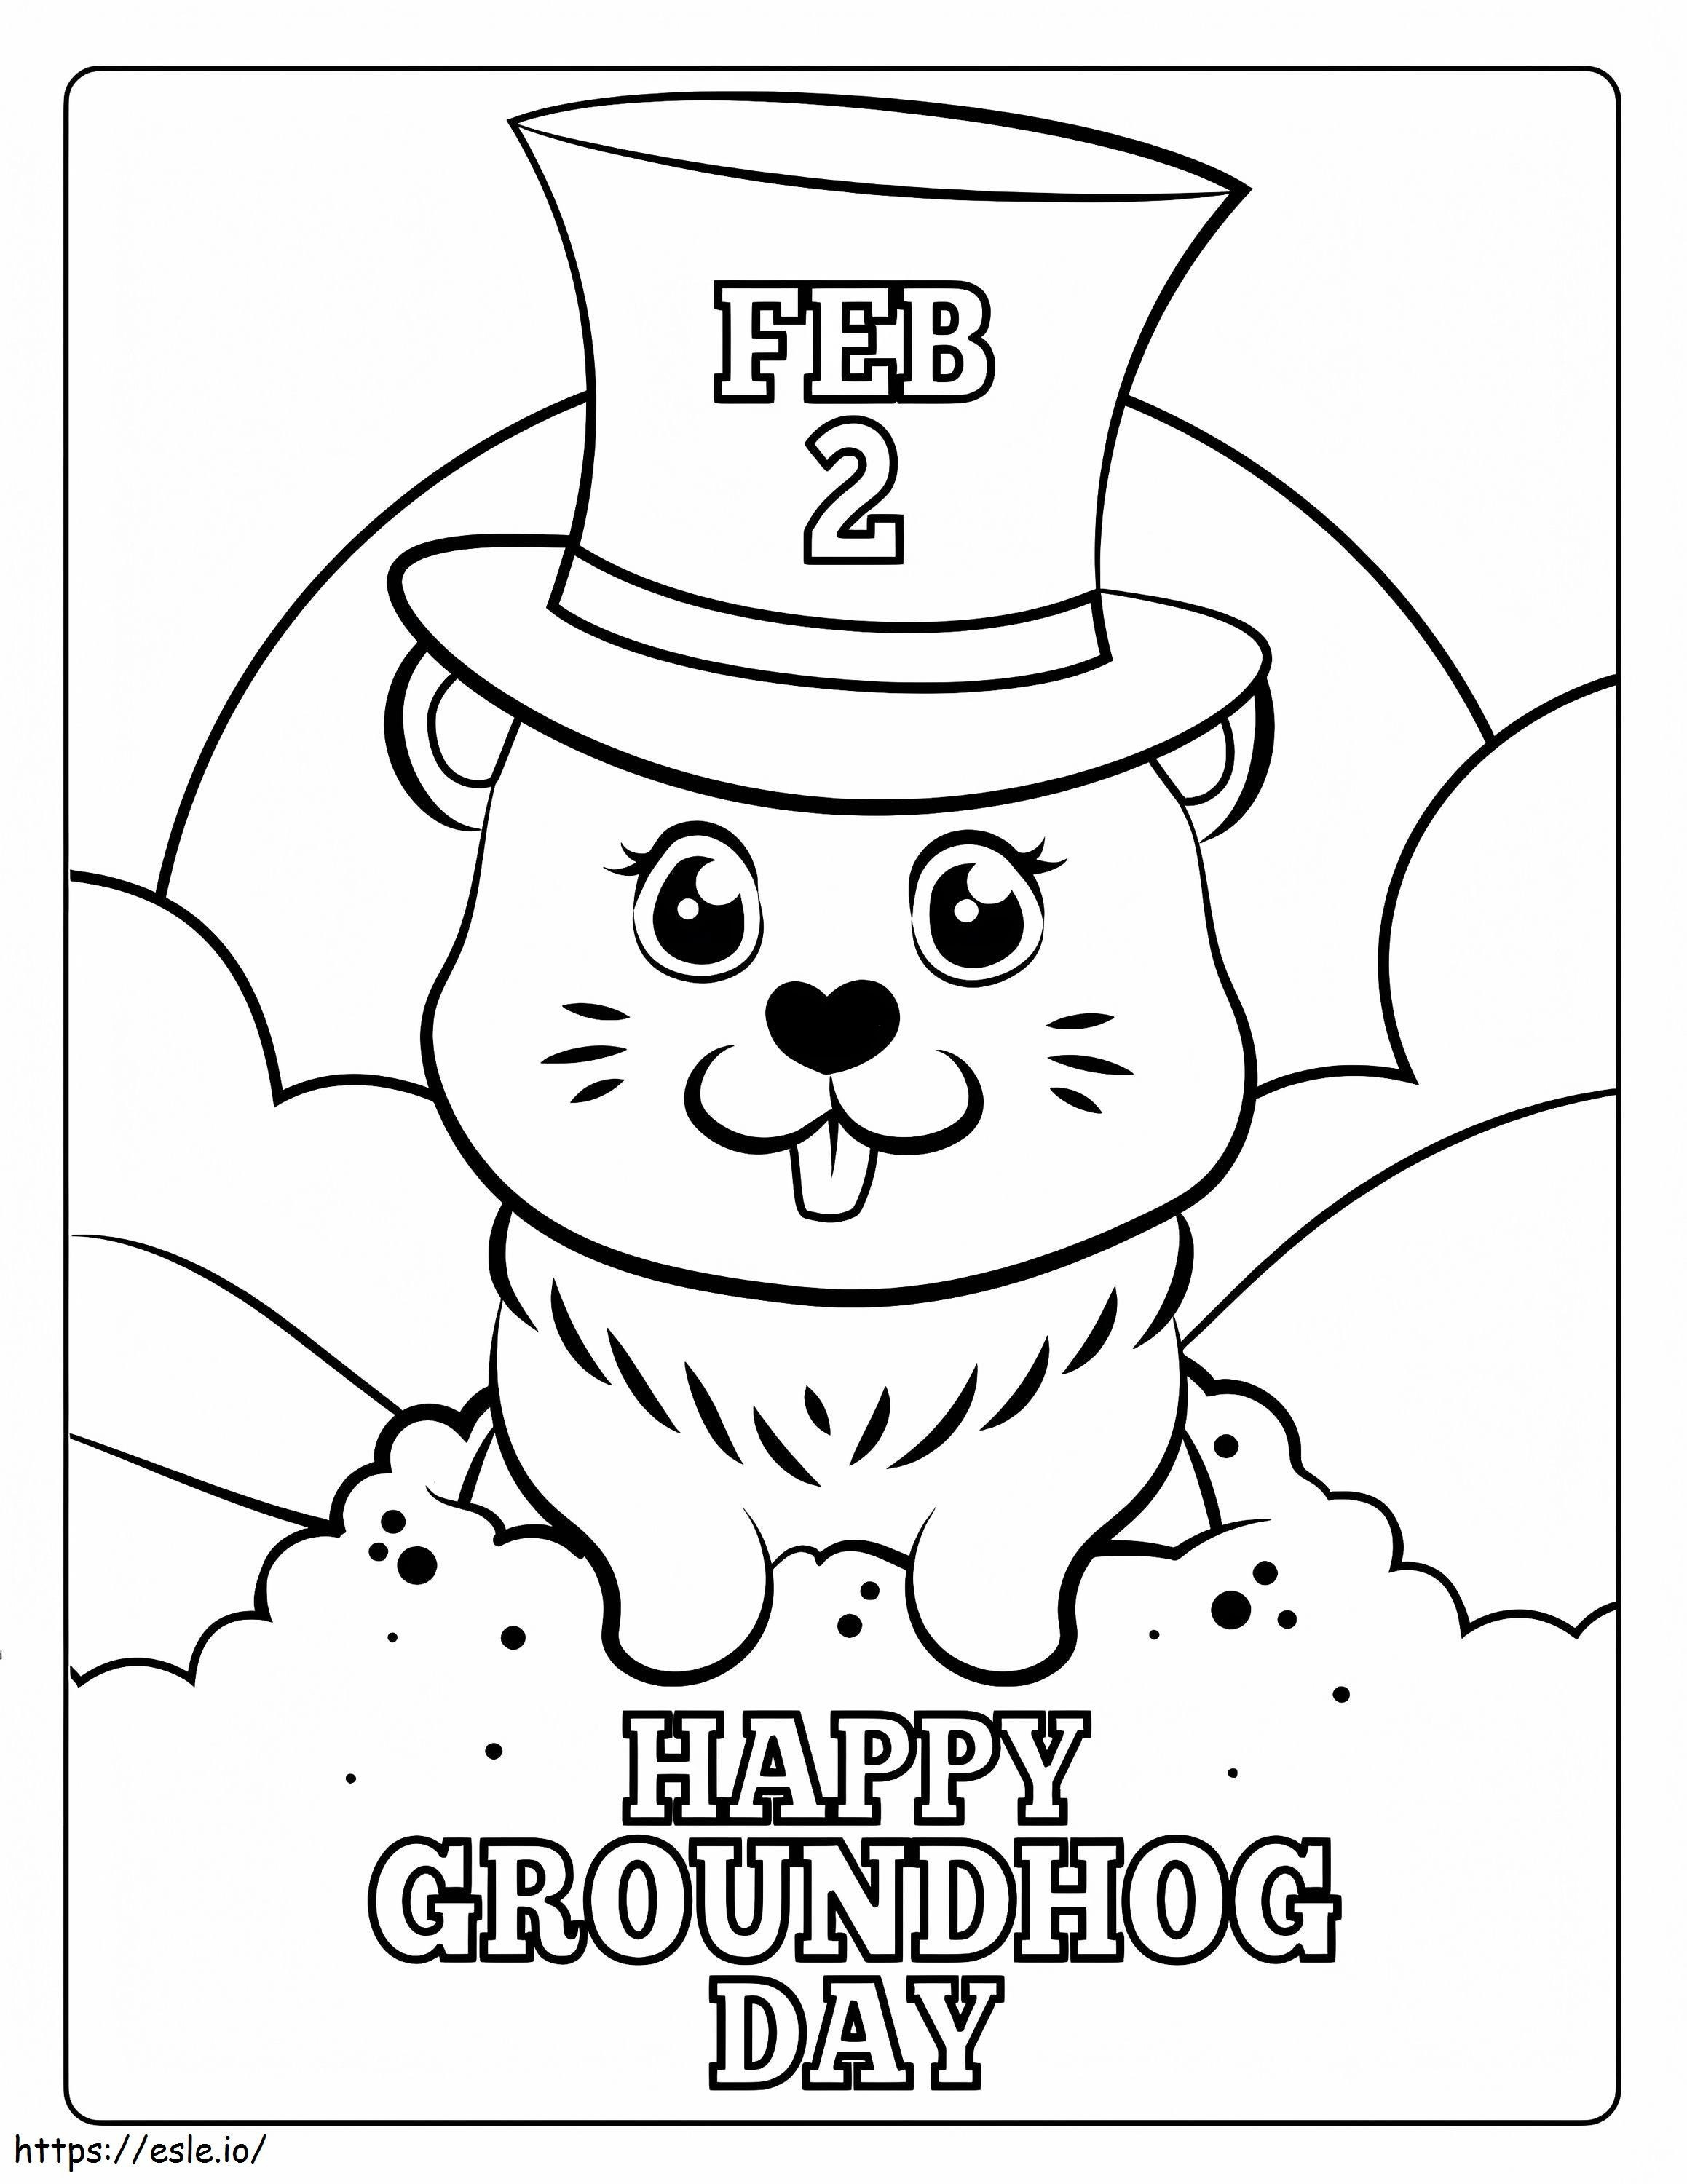 Groundhog Day 3 coloring page